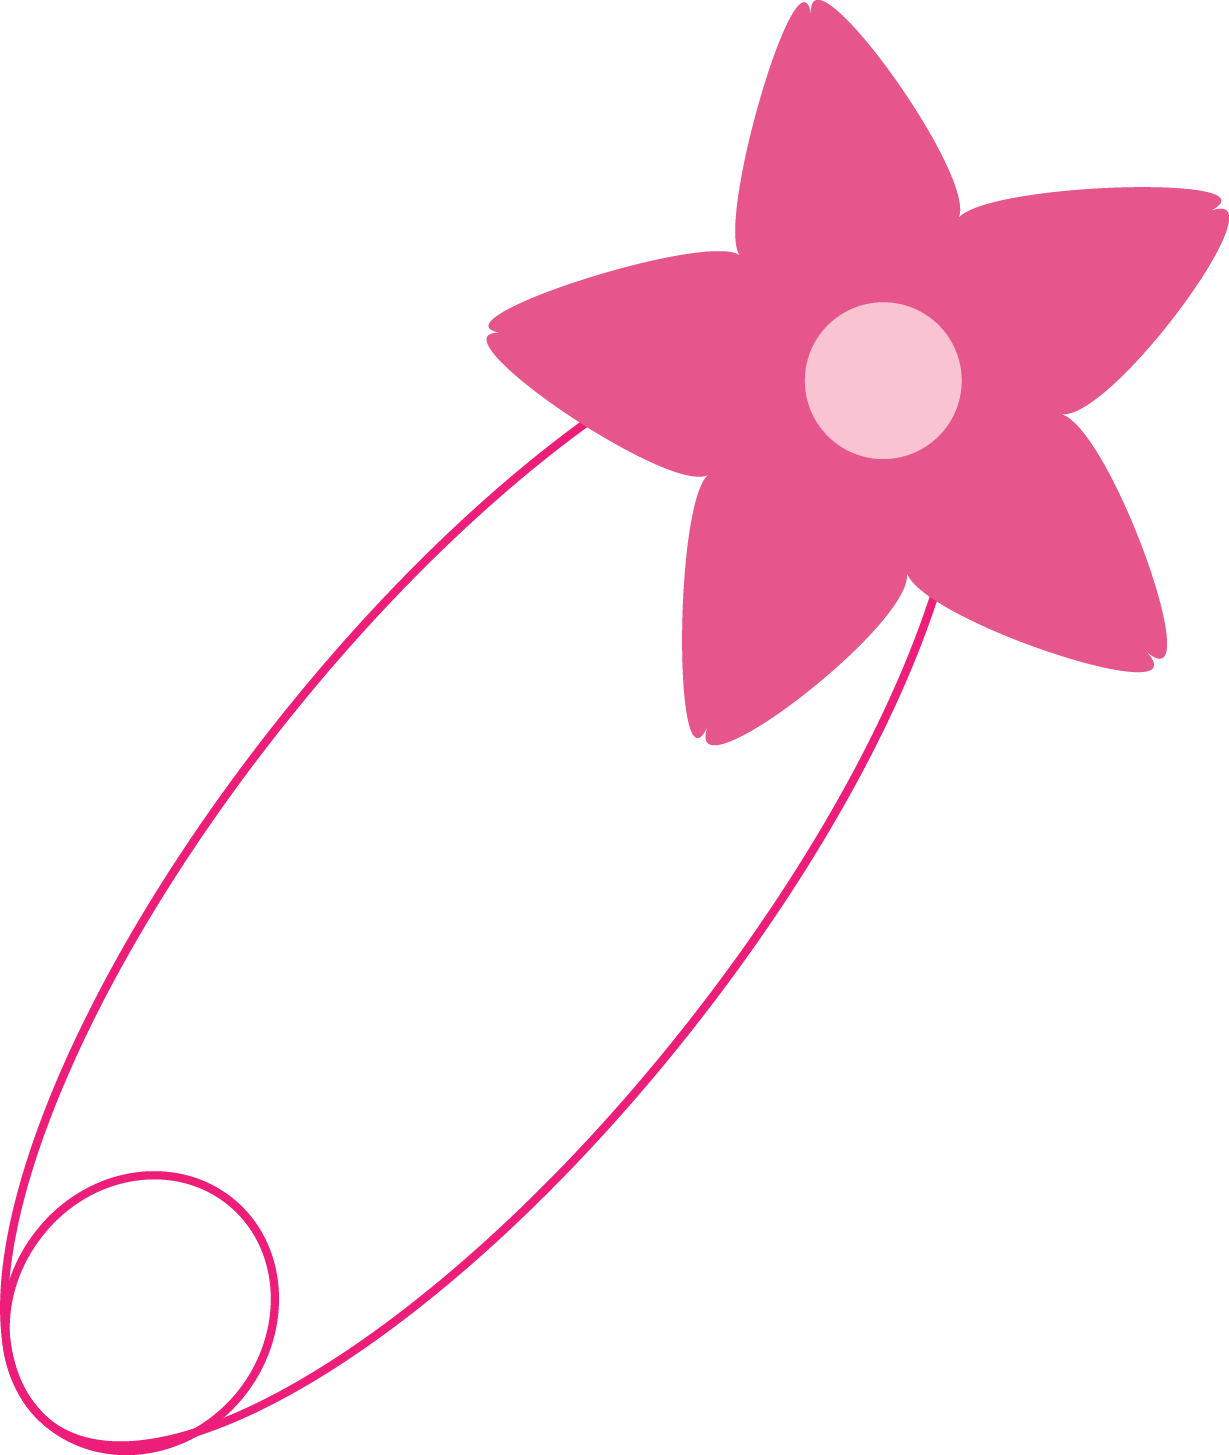 Baby Girl Safety Pin Clip Art - Pink Baby Safety Pin (1229x1455)